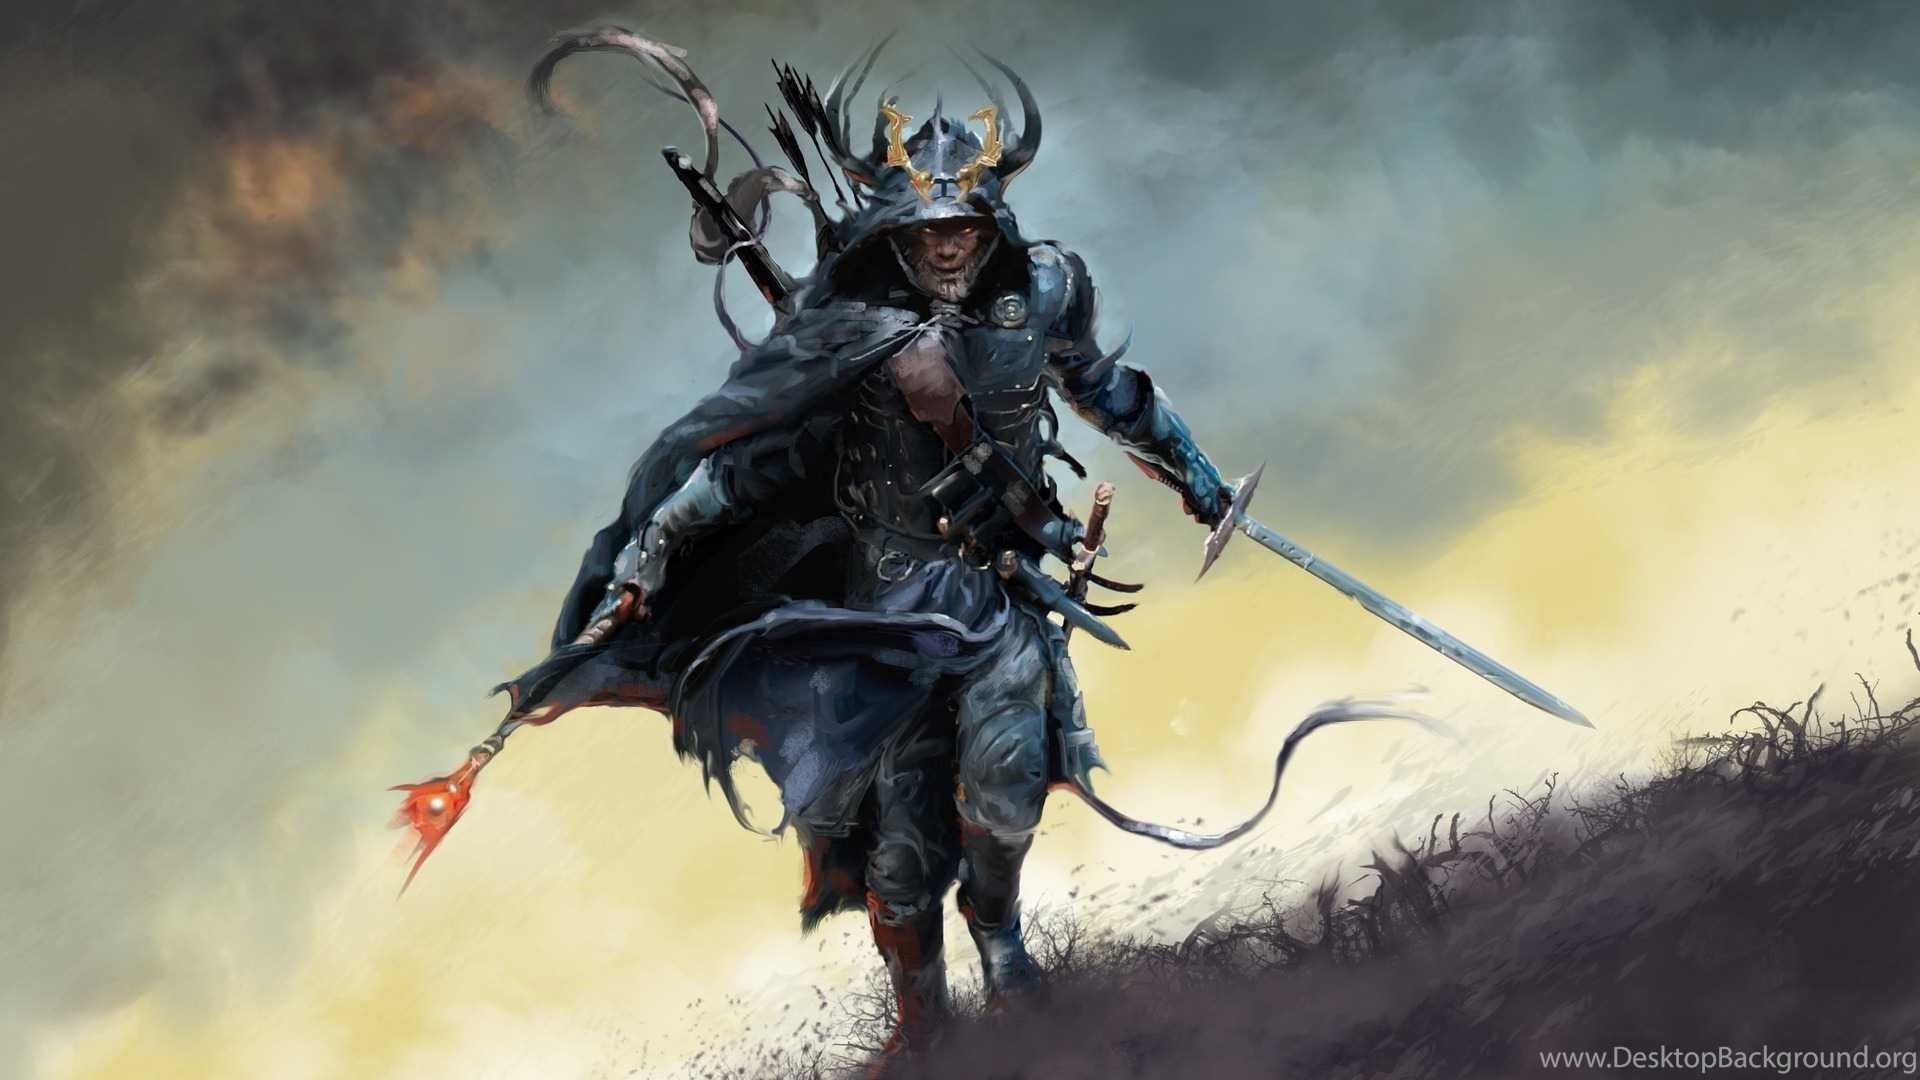 Hd Samurai Wallpaper (best HD Samurai Wallpaper and image) on WallpaperChat